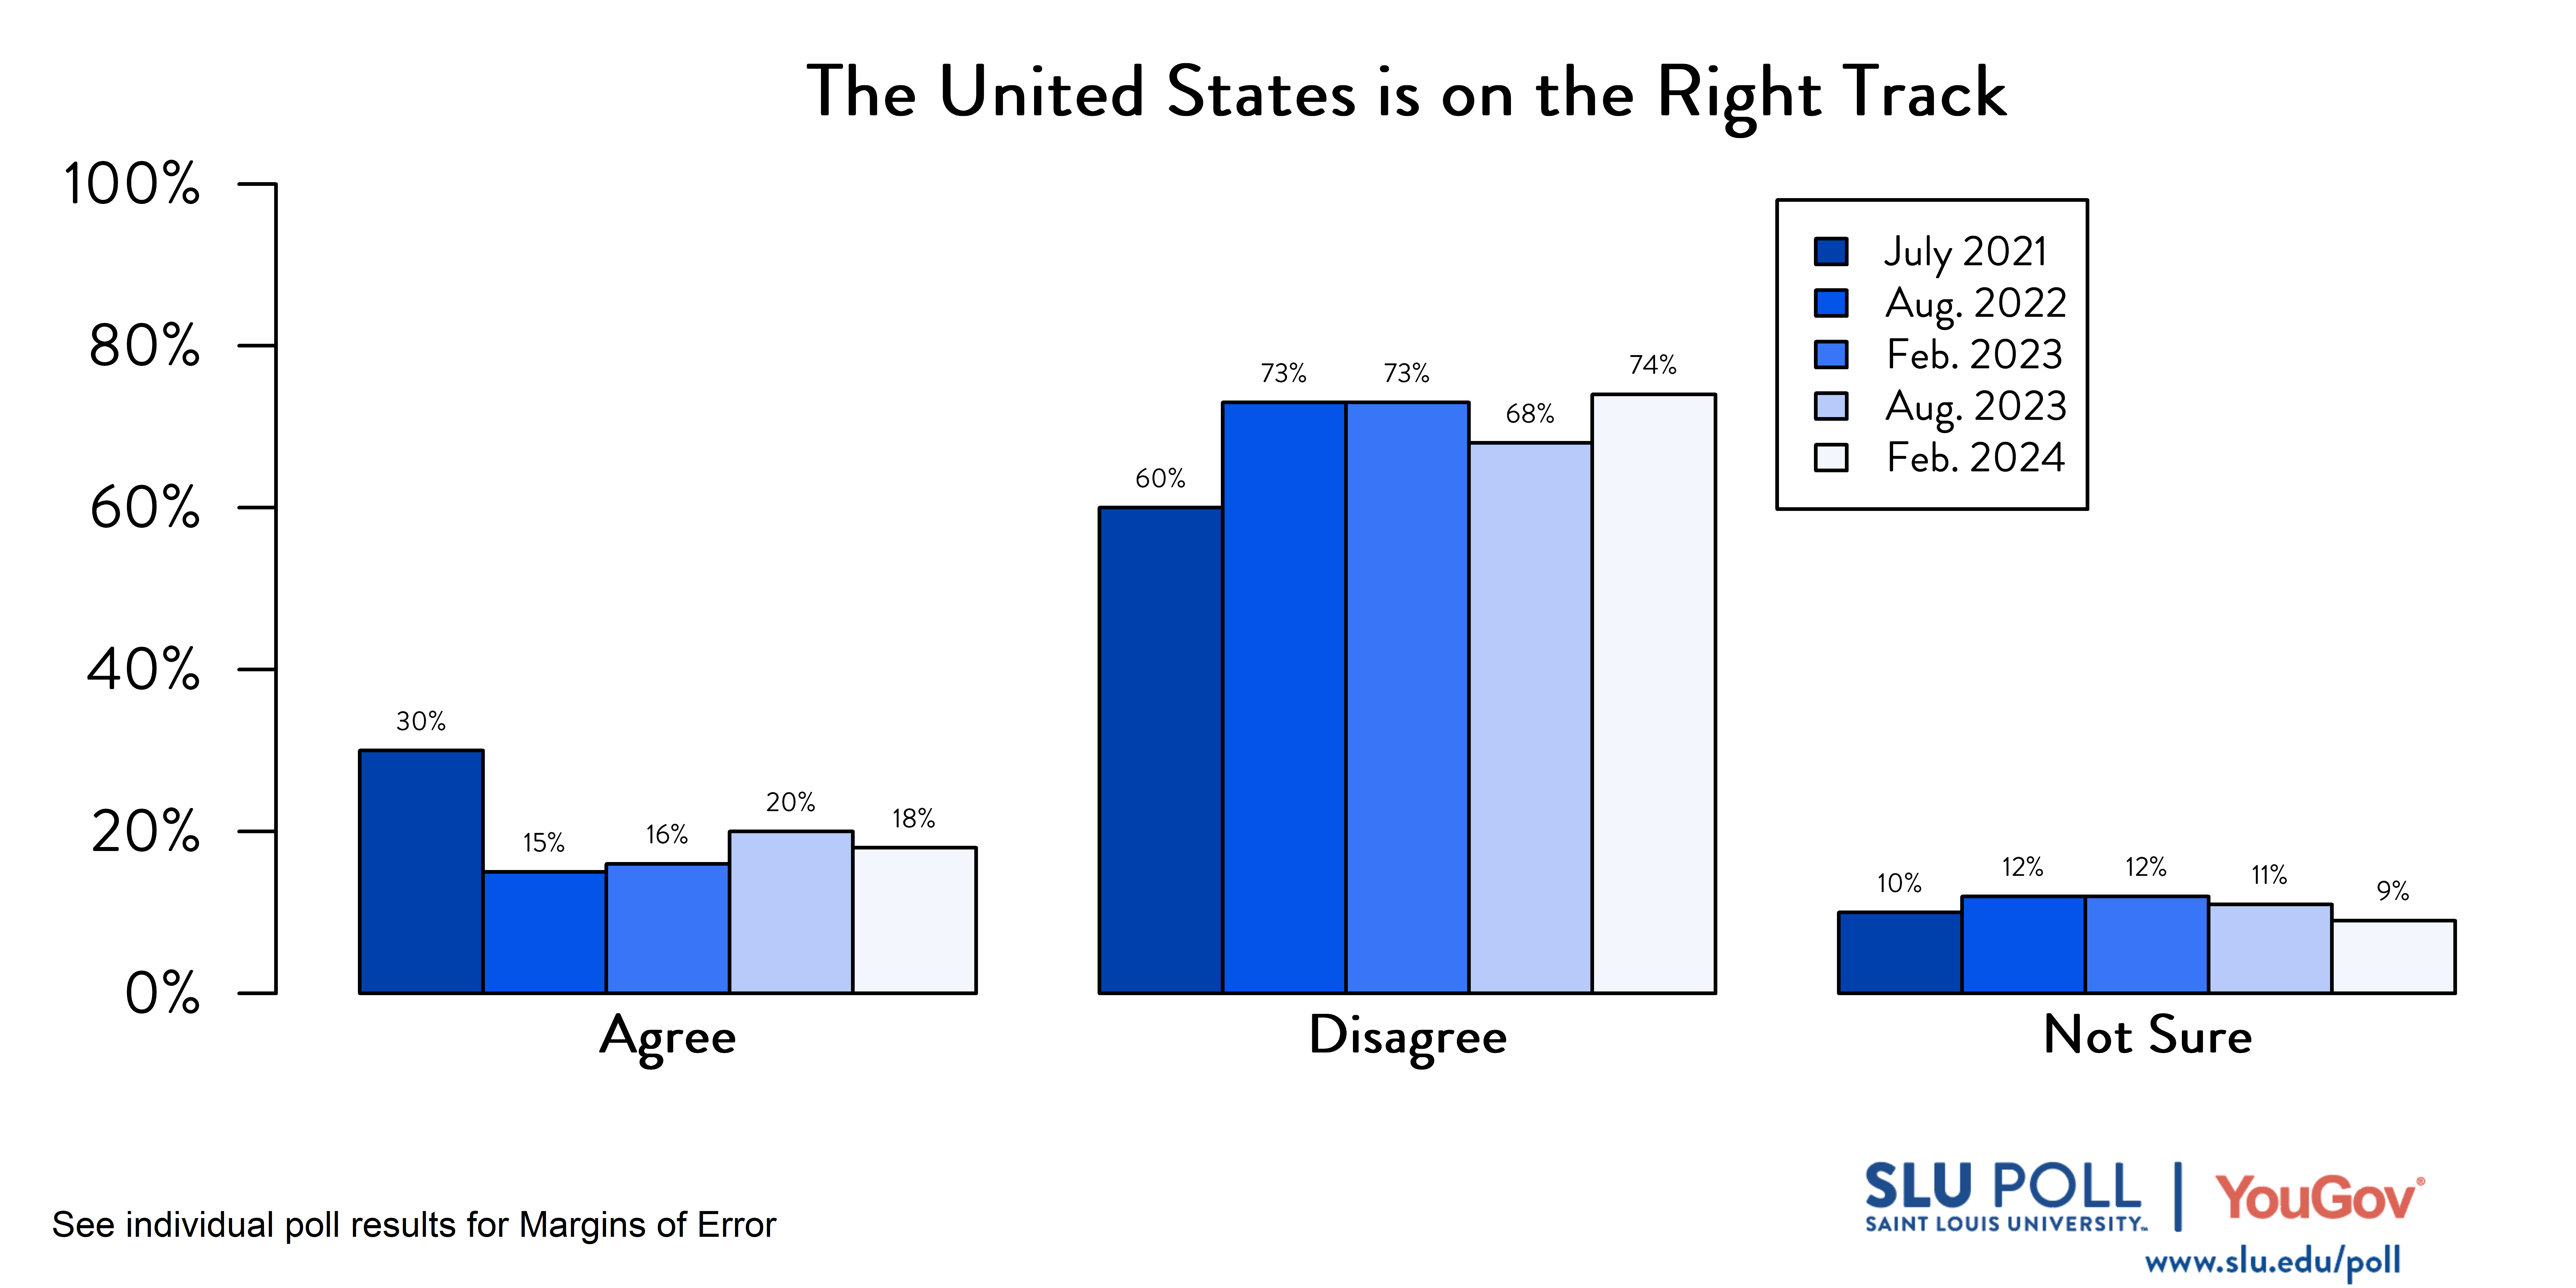 Likely voters' responses to 'Do you agree or disagree with the following statements…The United States is on the right track and headed in a good direction?'. July 2021 Voter Responses: 30% Agree, 60% Disagree, and 10% Not sure. August 2022 Voter Responses: 15% Agree, 73% Disagree, and 12% Not Sure. February 2023 Voter Responses: 16% Agree, 73% Disagree, and 12% Not sure. August 2023 Voter Responses: 20% Agree, 68% Disagree, and 11% Not Sure. February 2024 Voter Responses: 18% Agree, 74% Disagree, and 9% Not Sure.